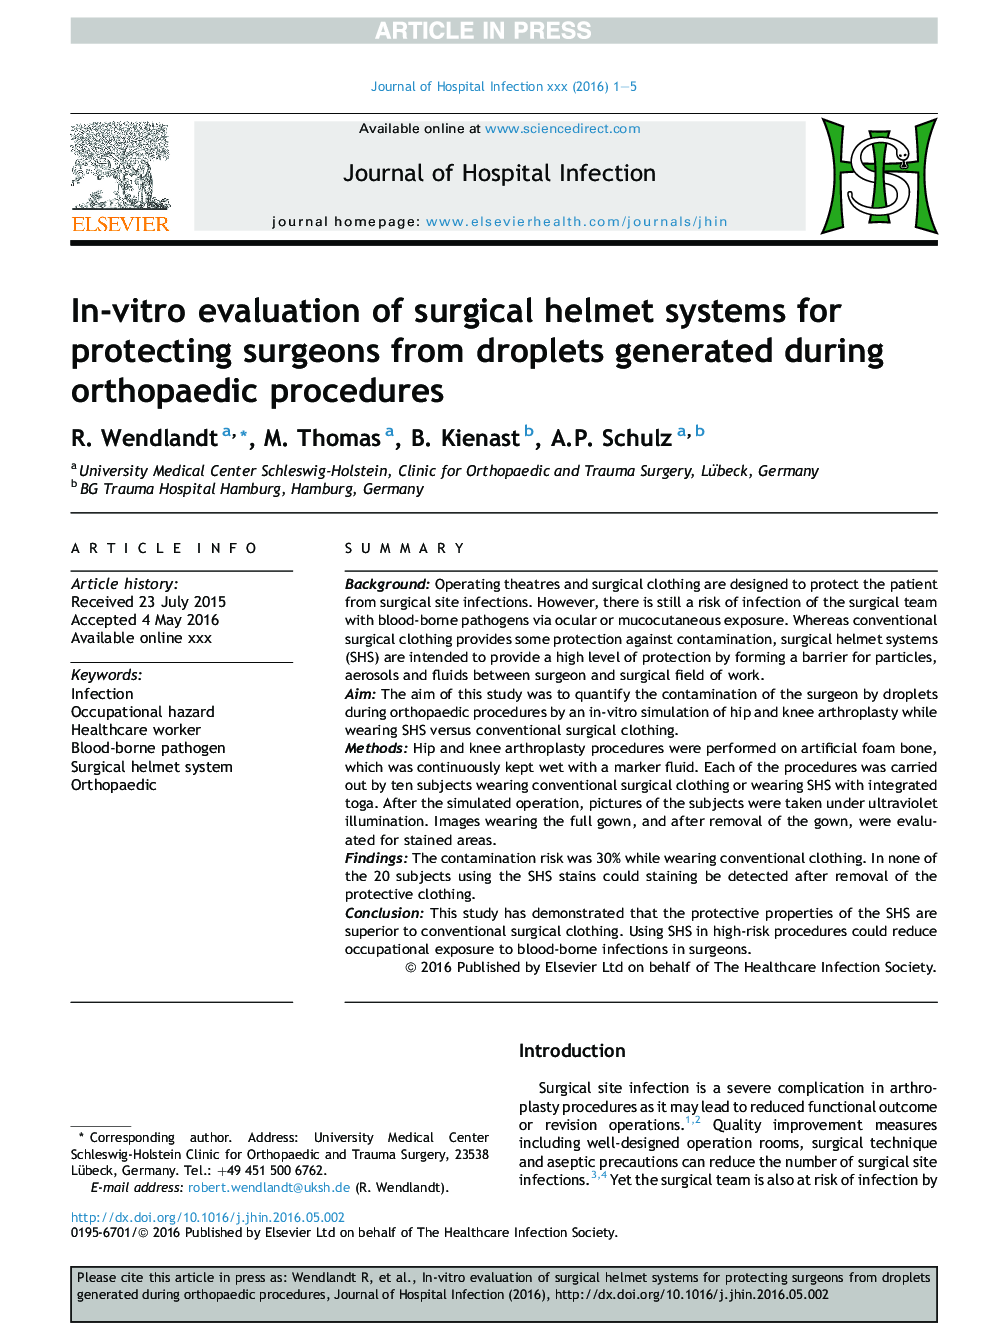 In-vitro evaluation of surgical helmet systems for protecting surgeons from droplets generated during orthopaedic procedures